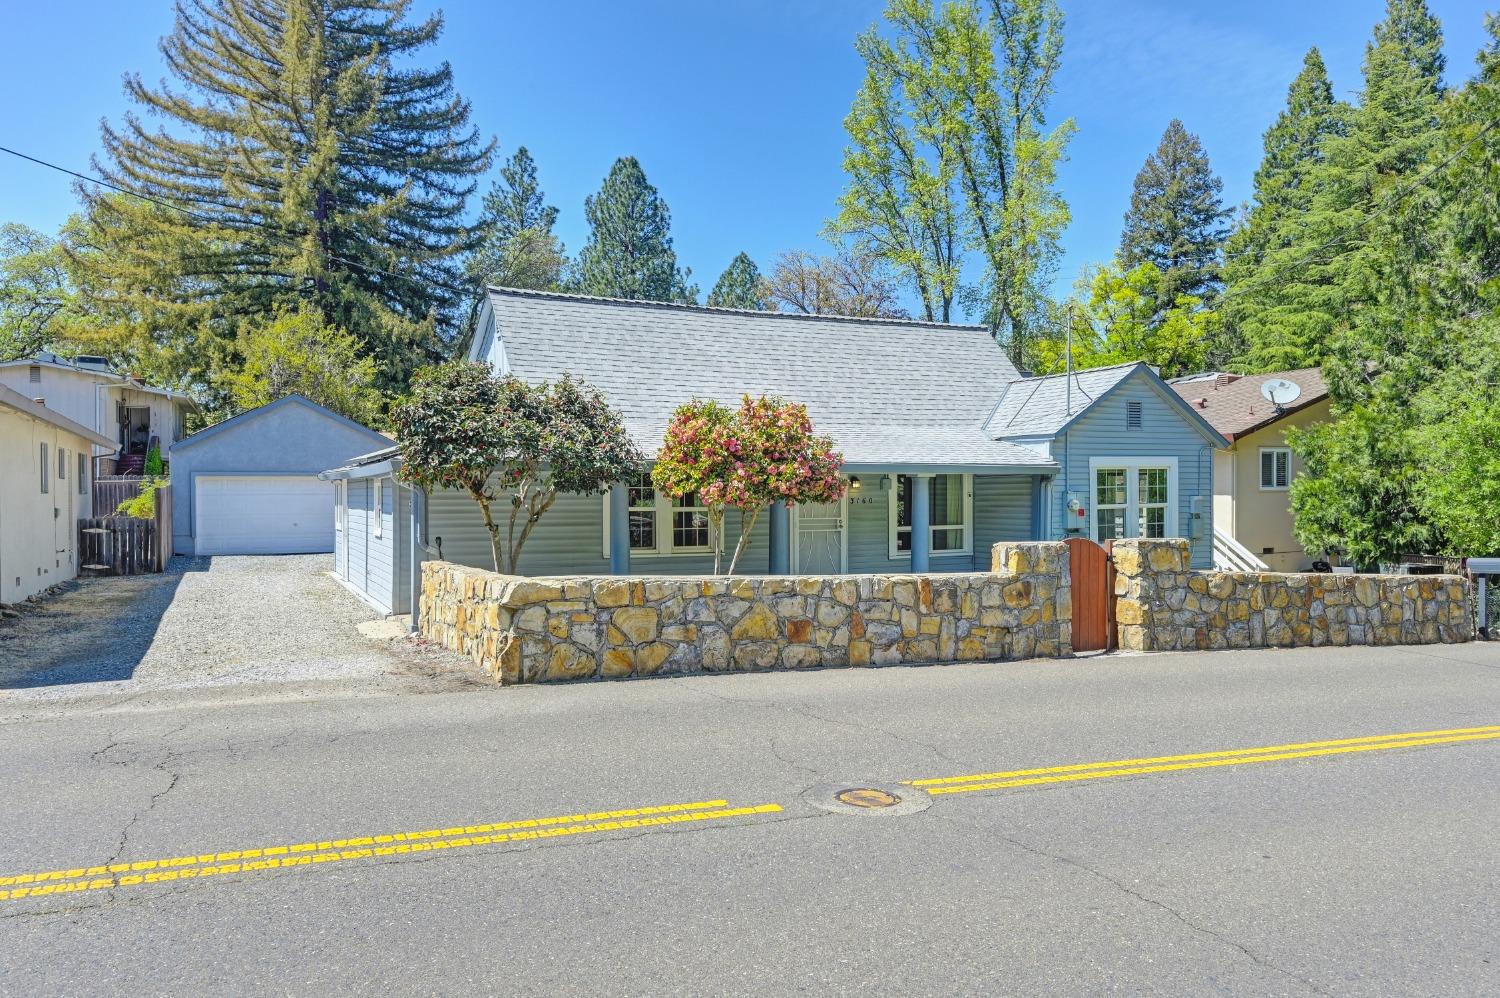 Photo of 3160 Turner St in Placerville, CA